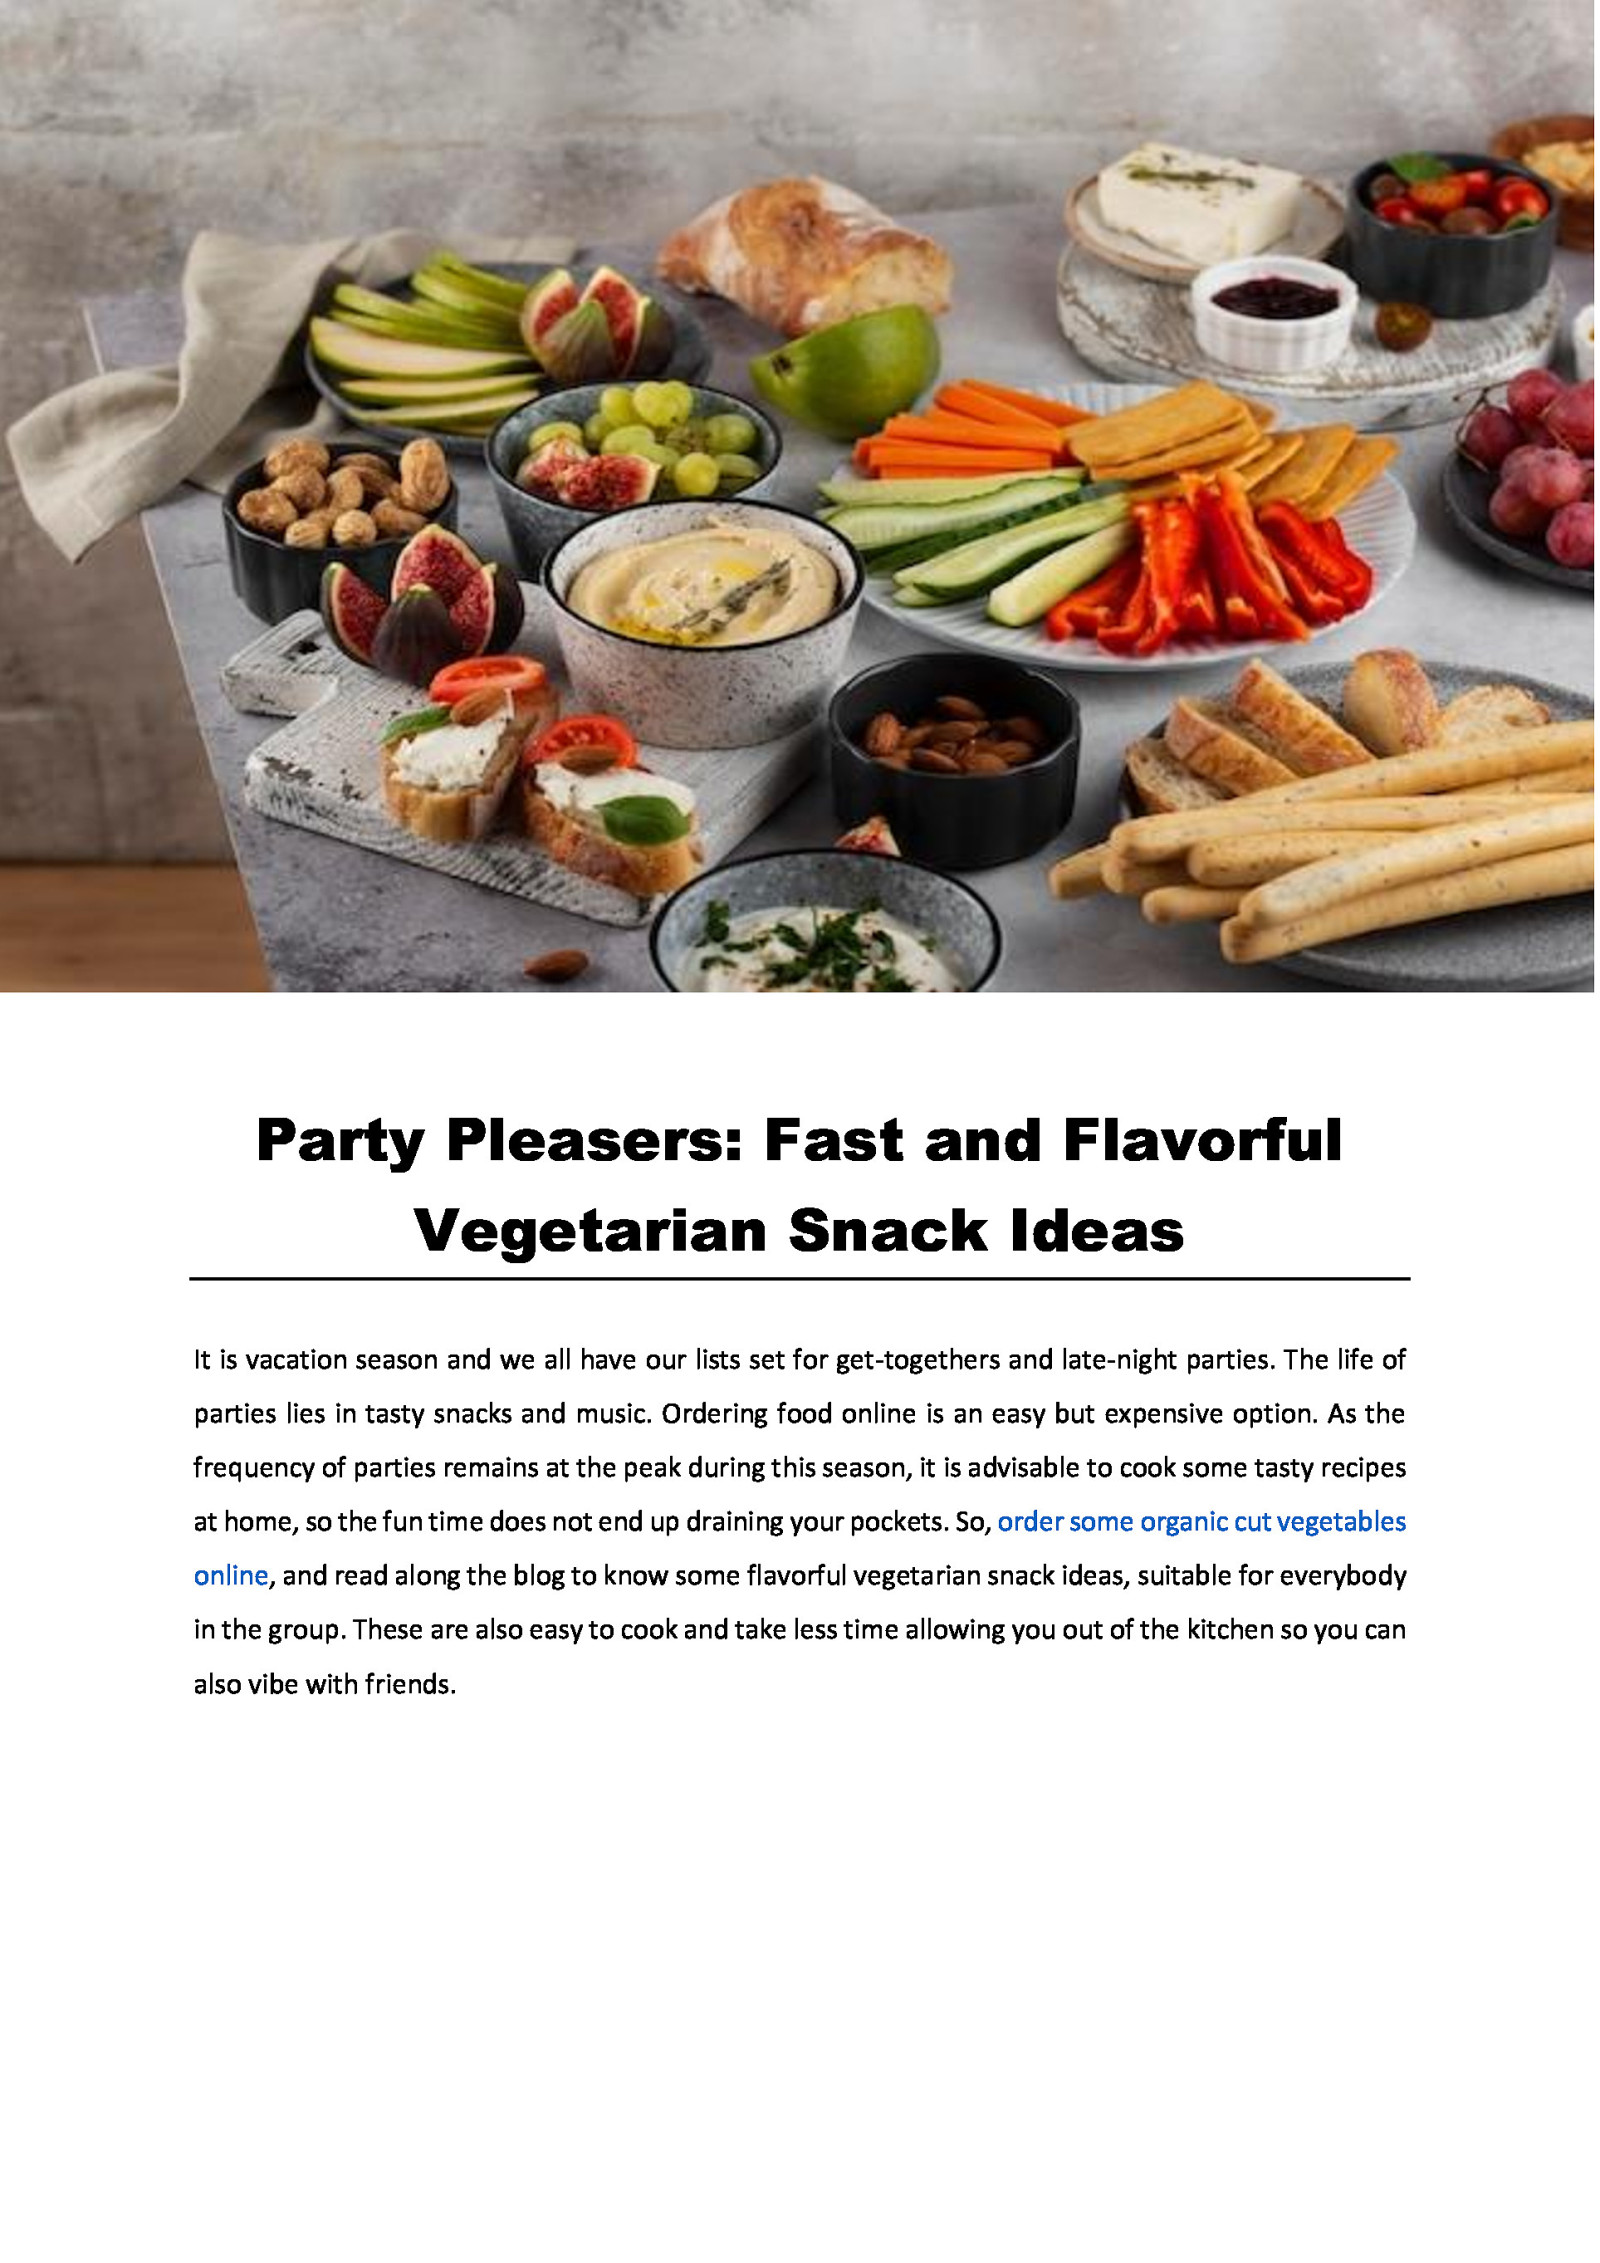 Party Pleasers: Fast and Flavorful Vegetarian Snack Ideas